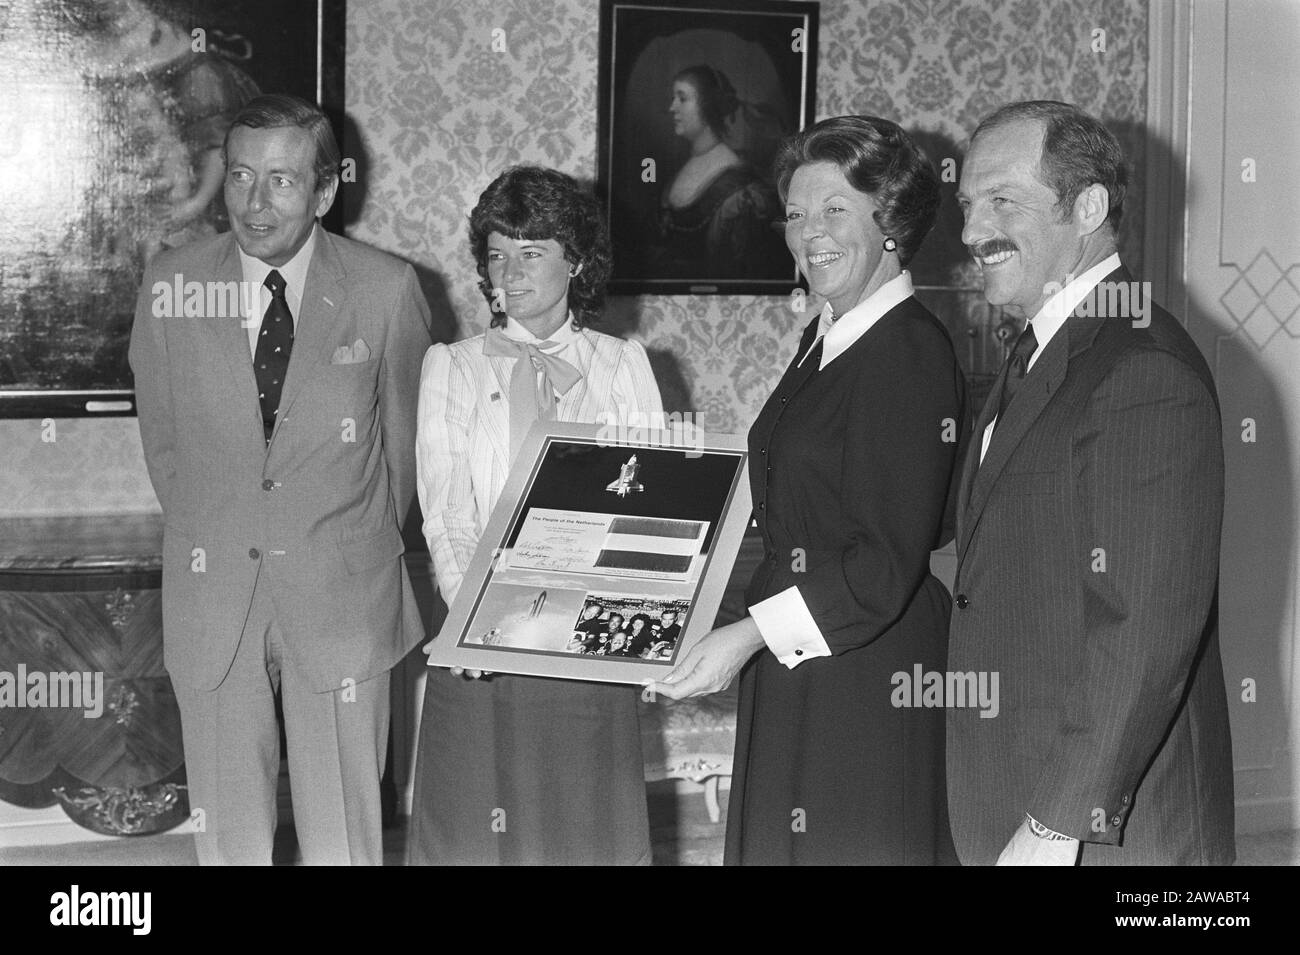 Queen Beatrix and Prince Claus received from the Space Shuttle astronauts mw. Sally Ride, the first American woman in space and Captain Hauck at Huis ten Bosch. V.l.n.r. Prince Claus, mrs. Ride, Queen Beatrix and Captain Hauck Date: September 28, 1983 Location: The Hague, South Holland Keywords: group portraits, queens, press conferences, portraits, astronauts, space travel, women Person Name: Beatrix (Queen Netherlands), Claus (prince Netherlands), Hauck , Frederick H., Ride, Sally K. Stock Photo